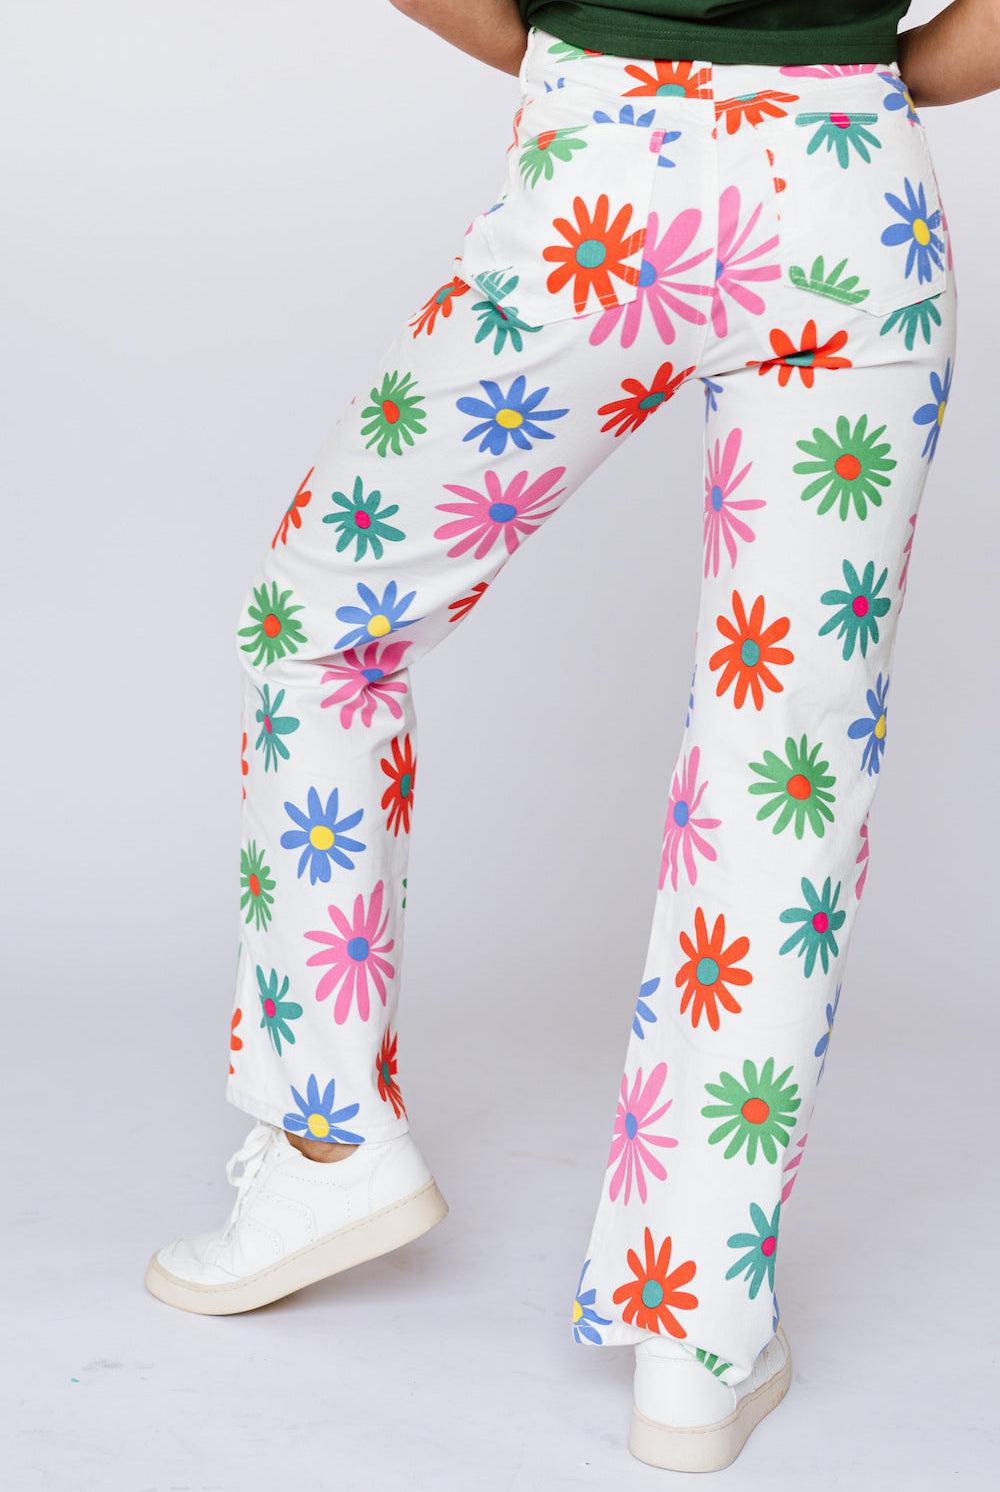 White pants with daisy print